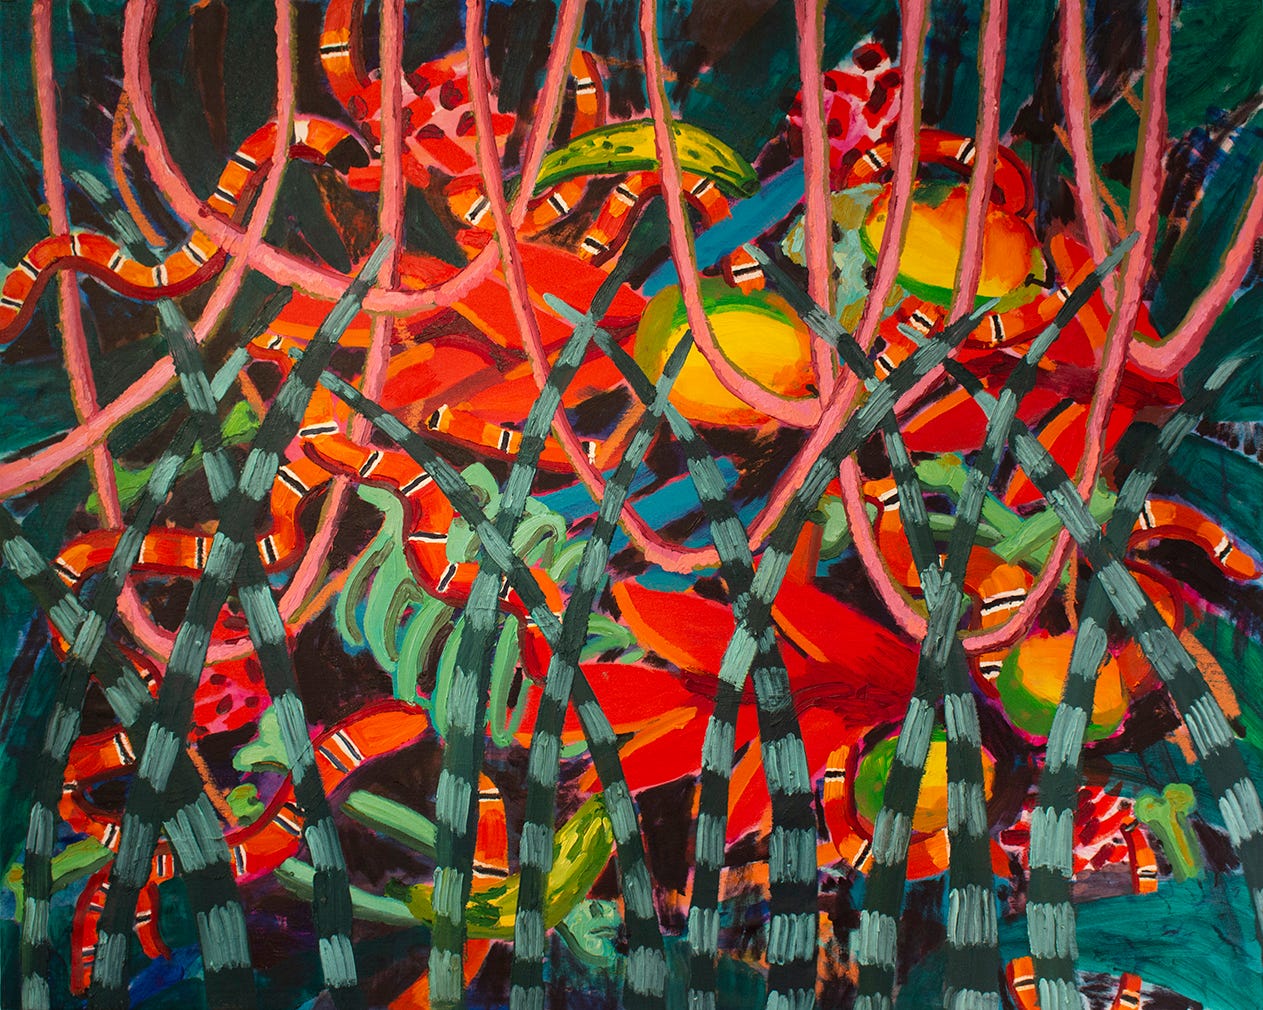 Coral Snakes and Vines, acrylic and oil on canvas, 46”x57.5”